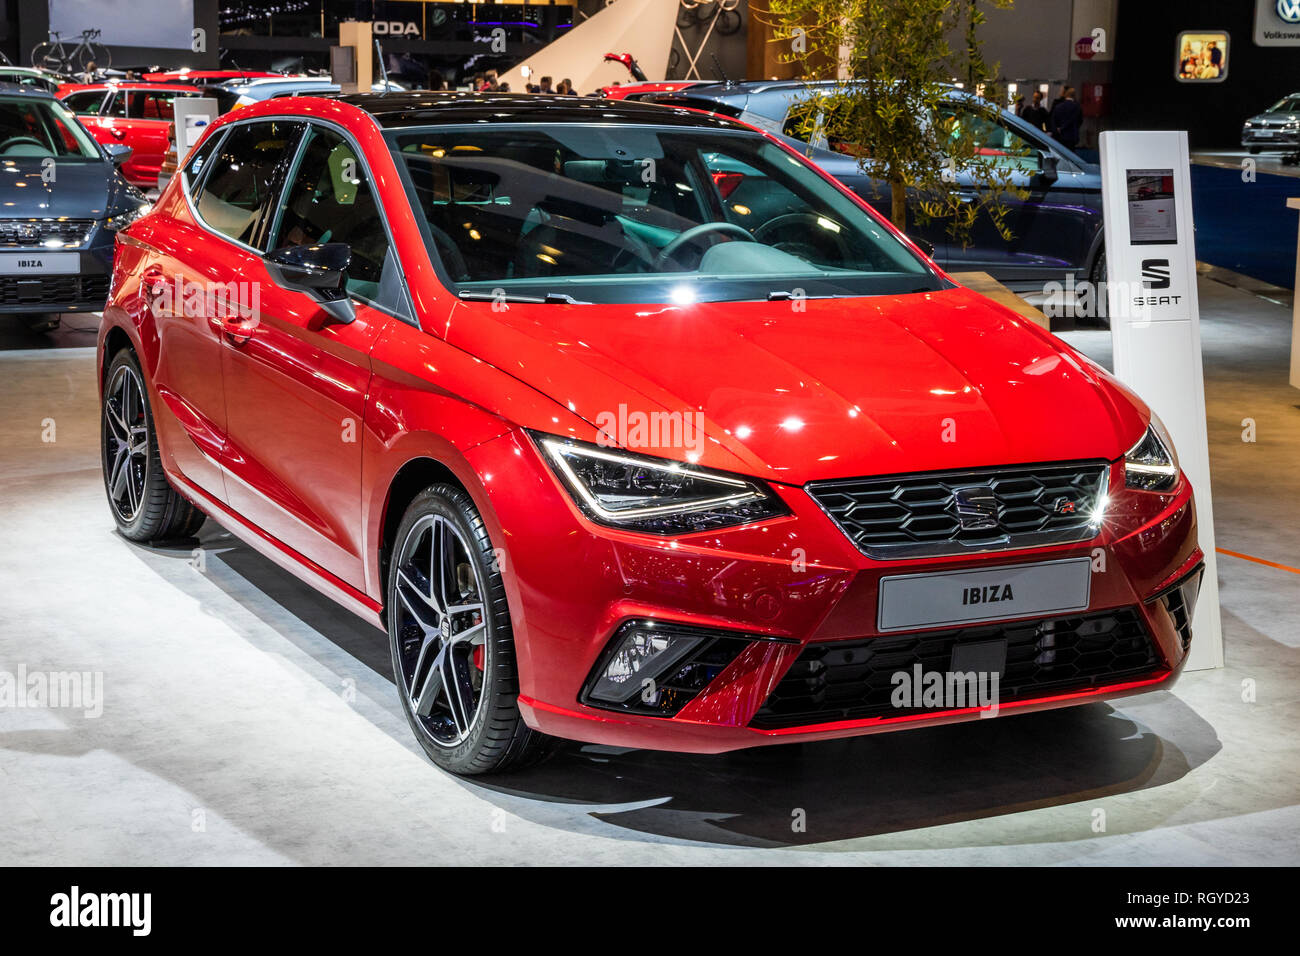 BRUSSELS - JAN 18, 2019: Seat Ibiza car showcased at the 97th Brussels Motor Show 2019 Autosalon. Stock Photo